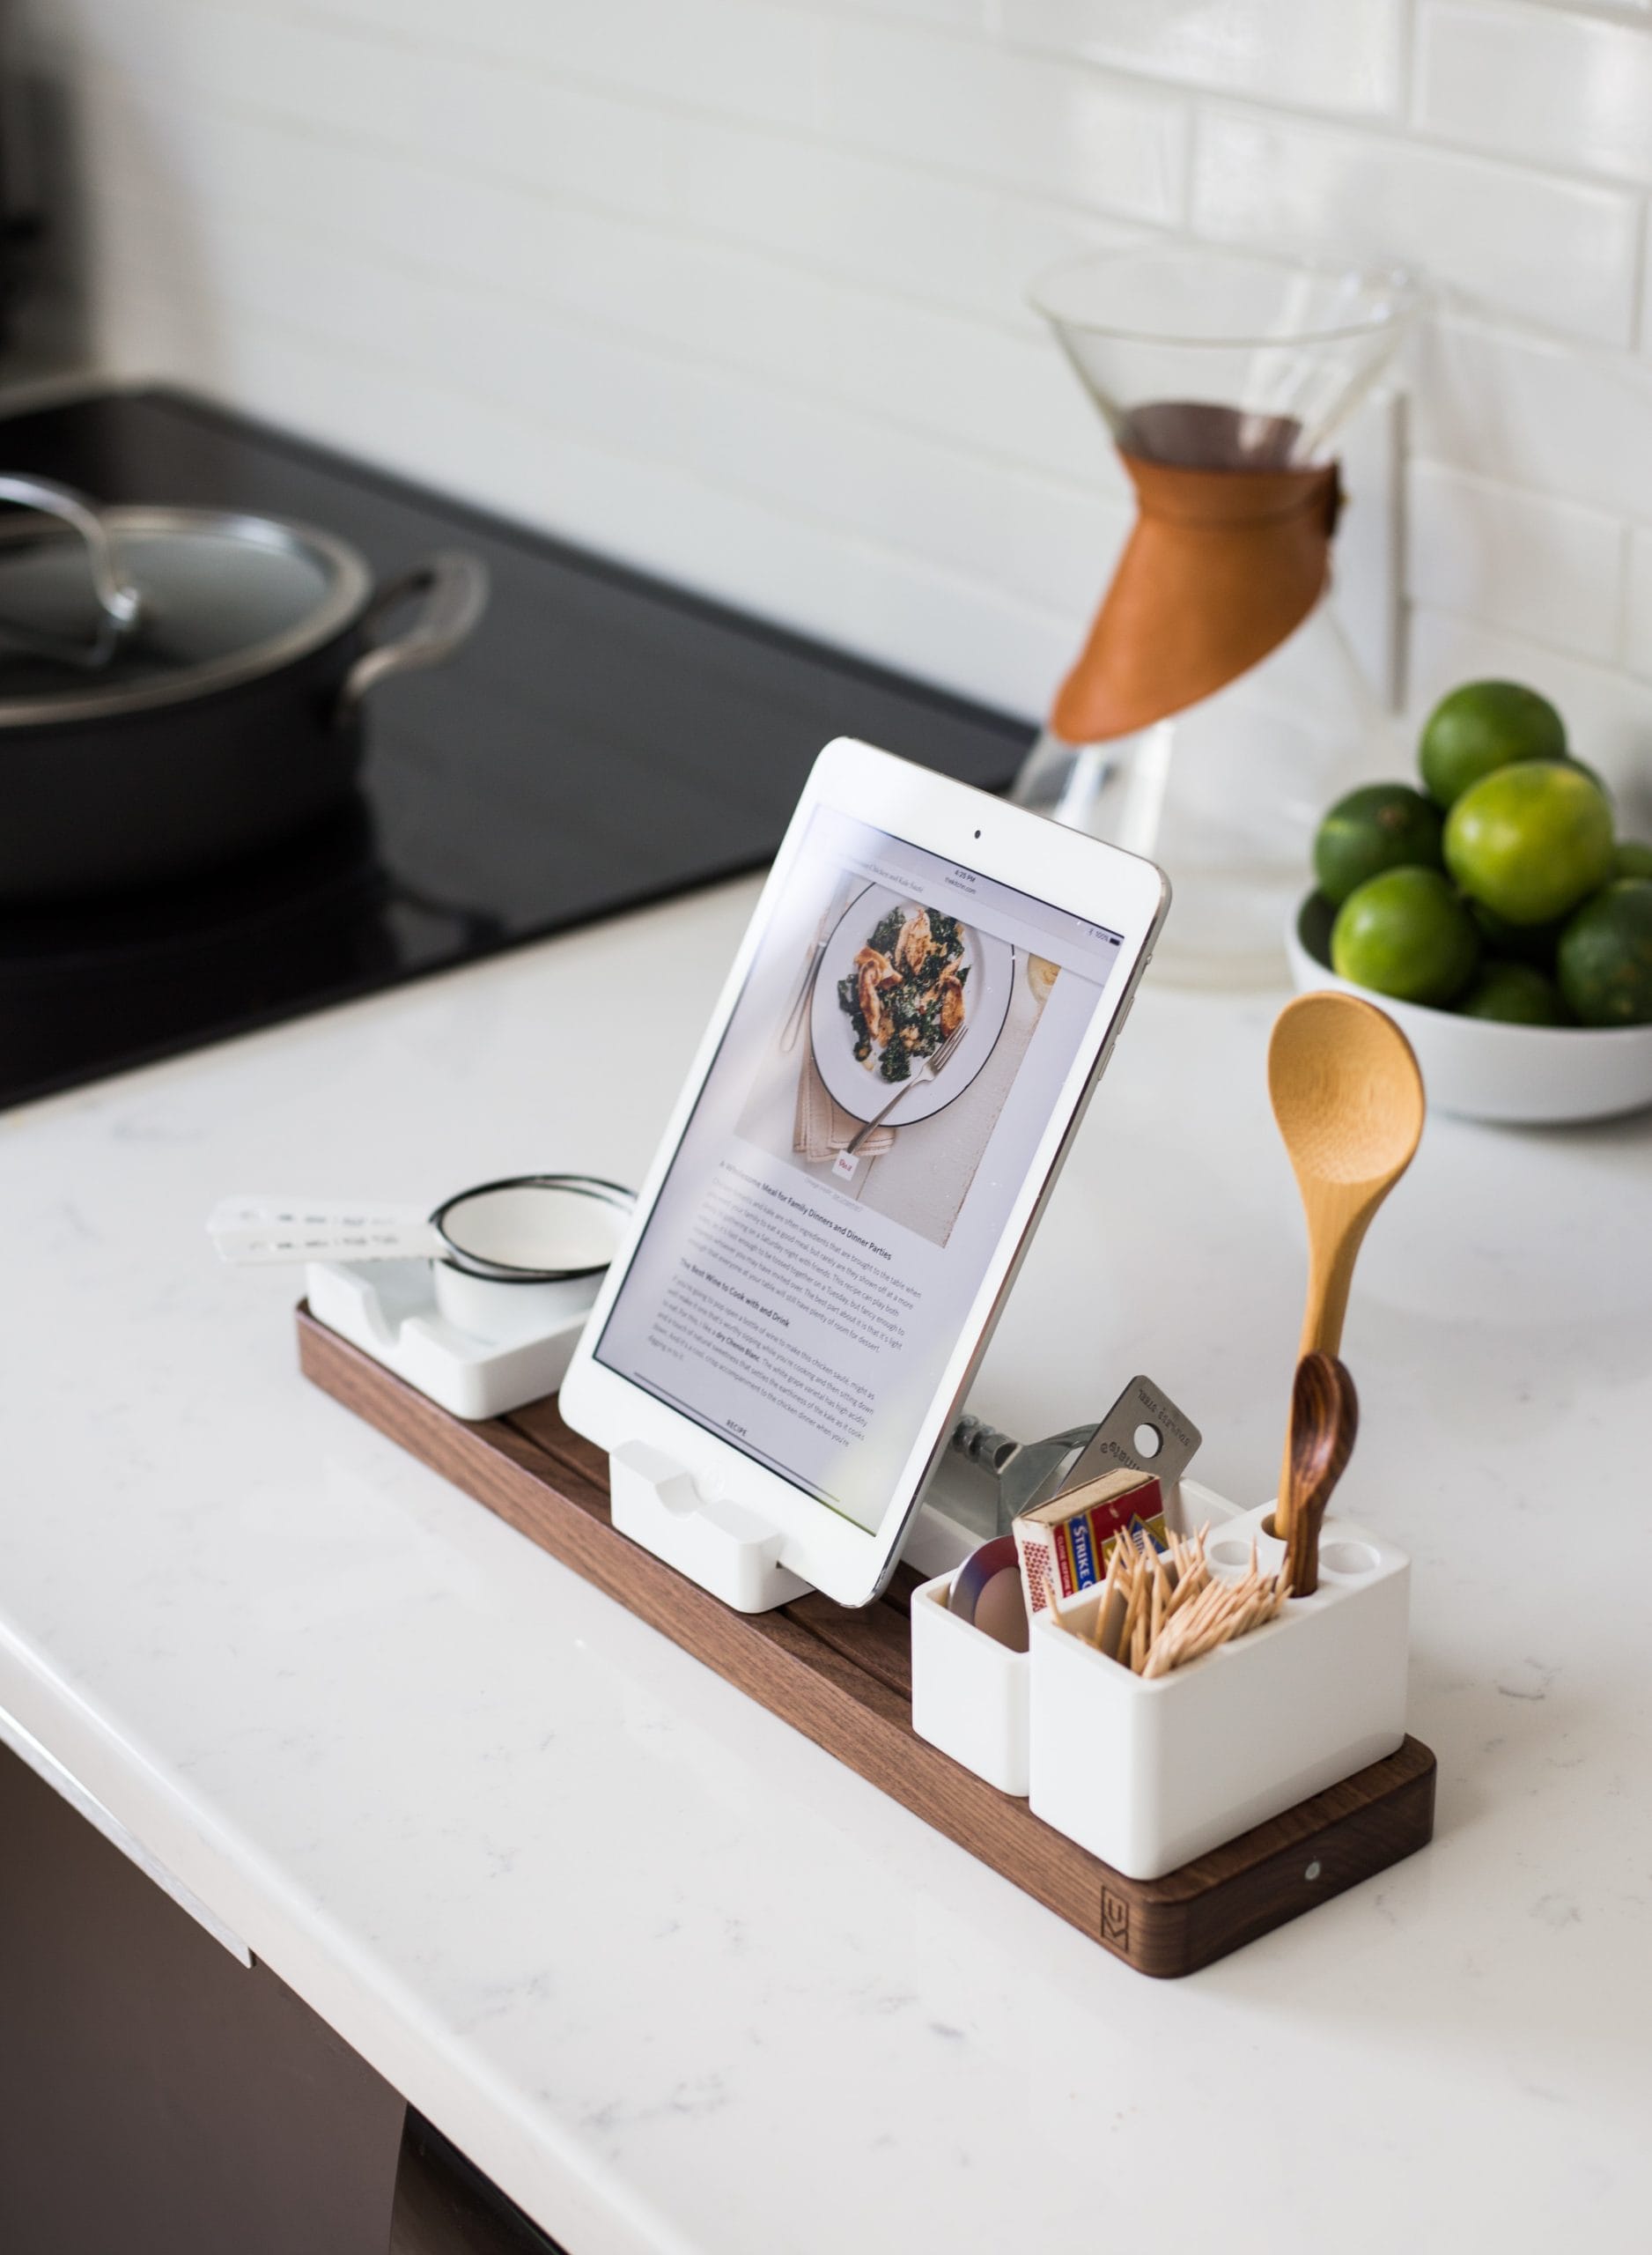 A tablet displaying a plate of food. The tablet is propped up on a kitchen table surrounded by various kitchen utensils.